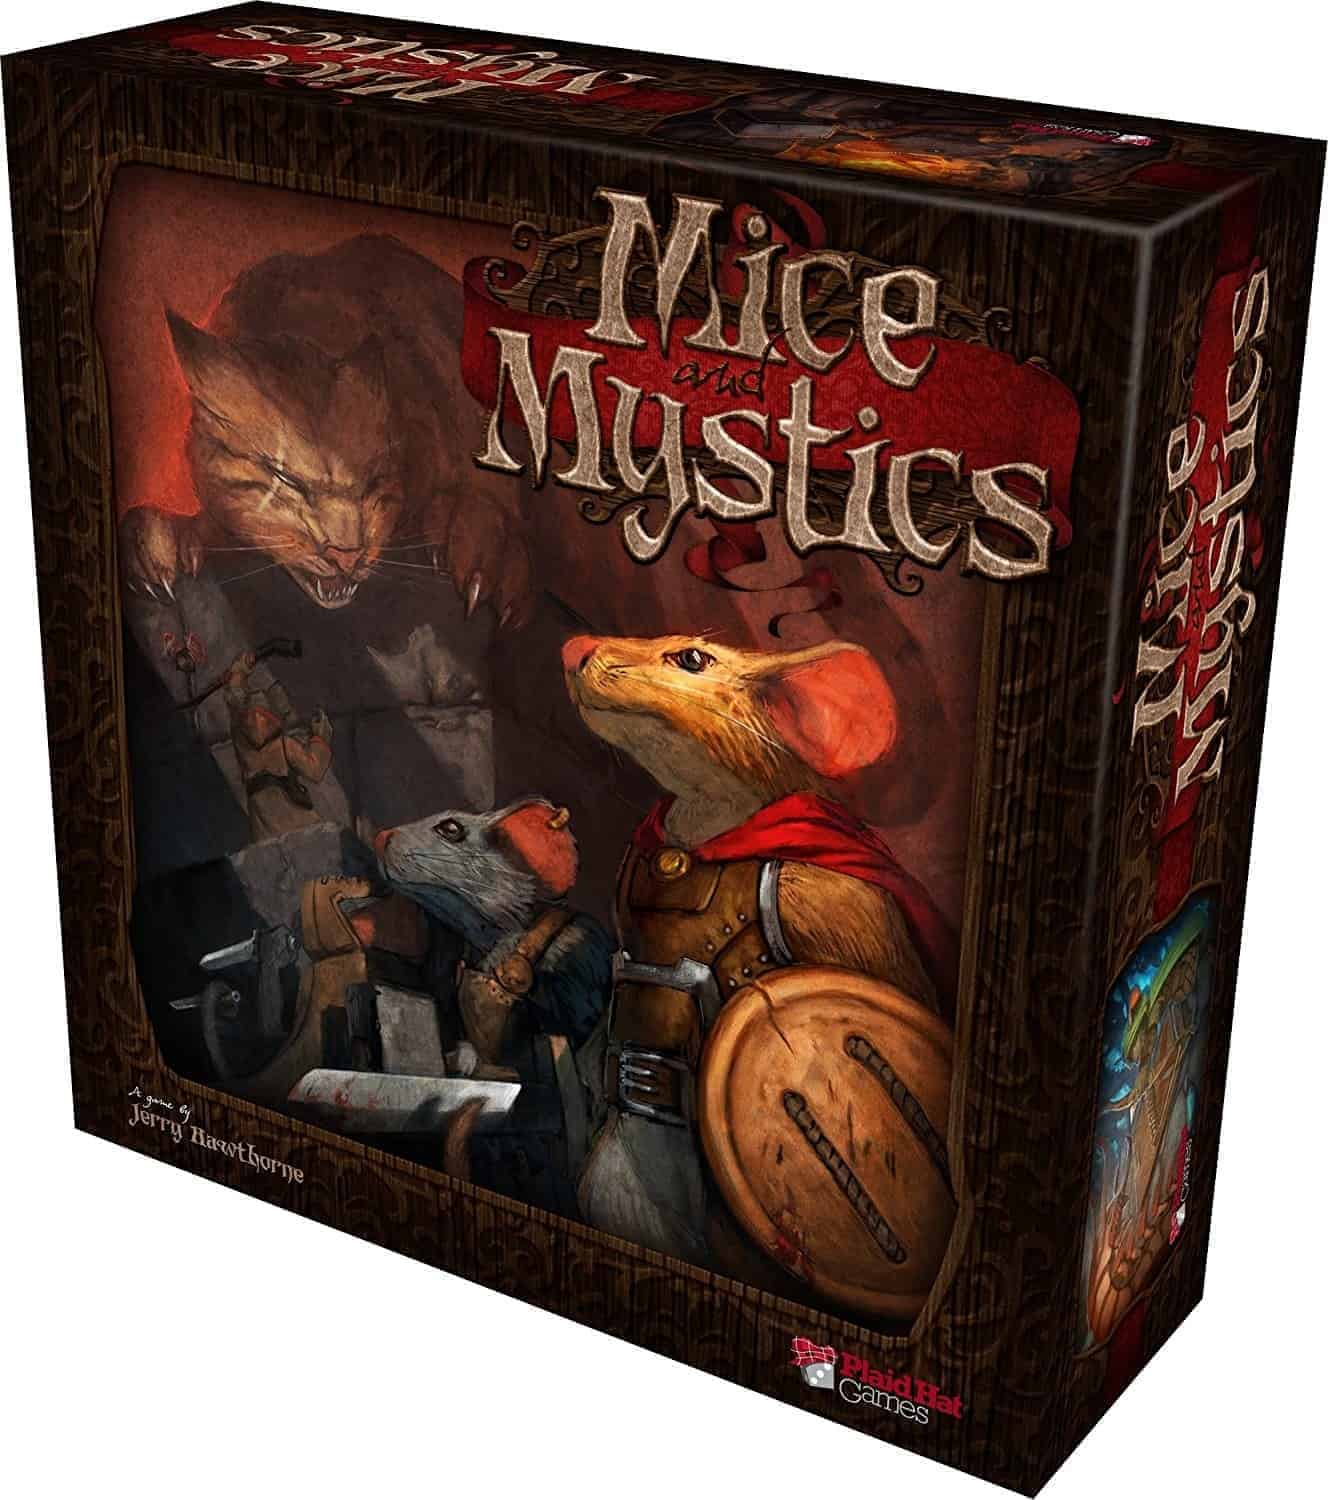 If you have kids, Mice & Mystics is set to become one of their most favorite fantasy board games ever!